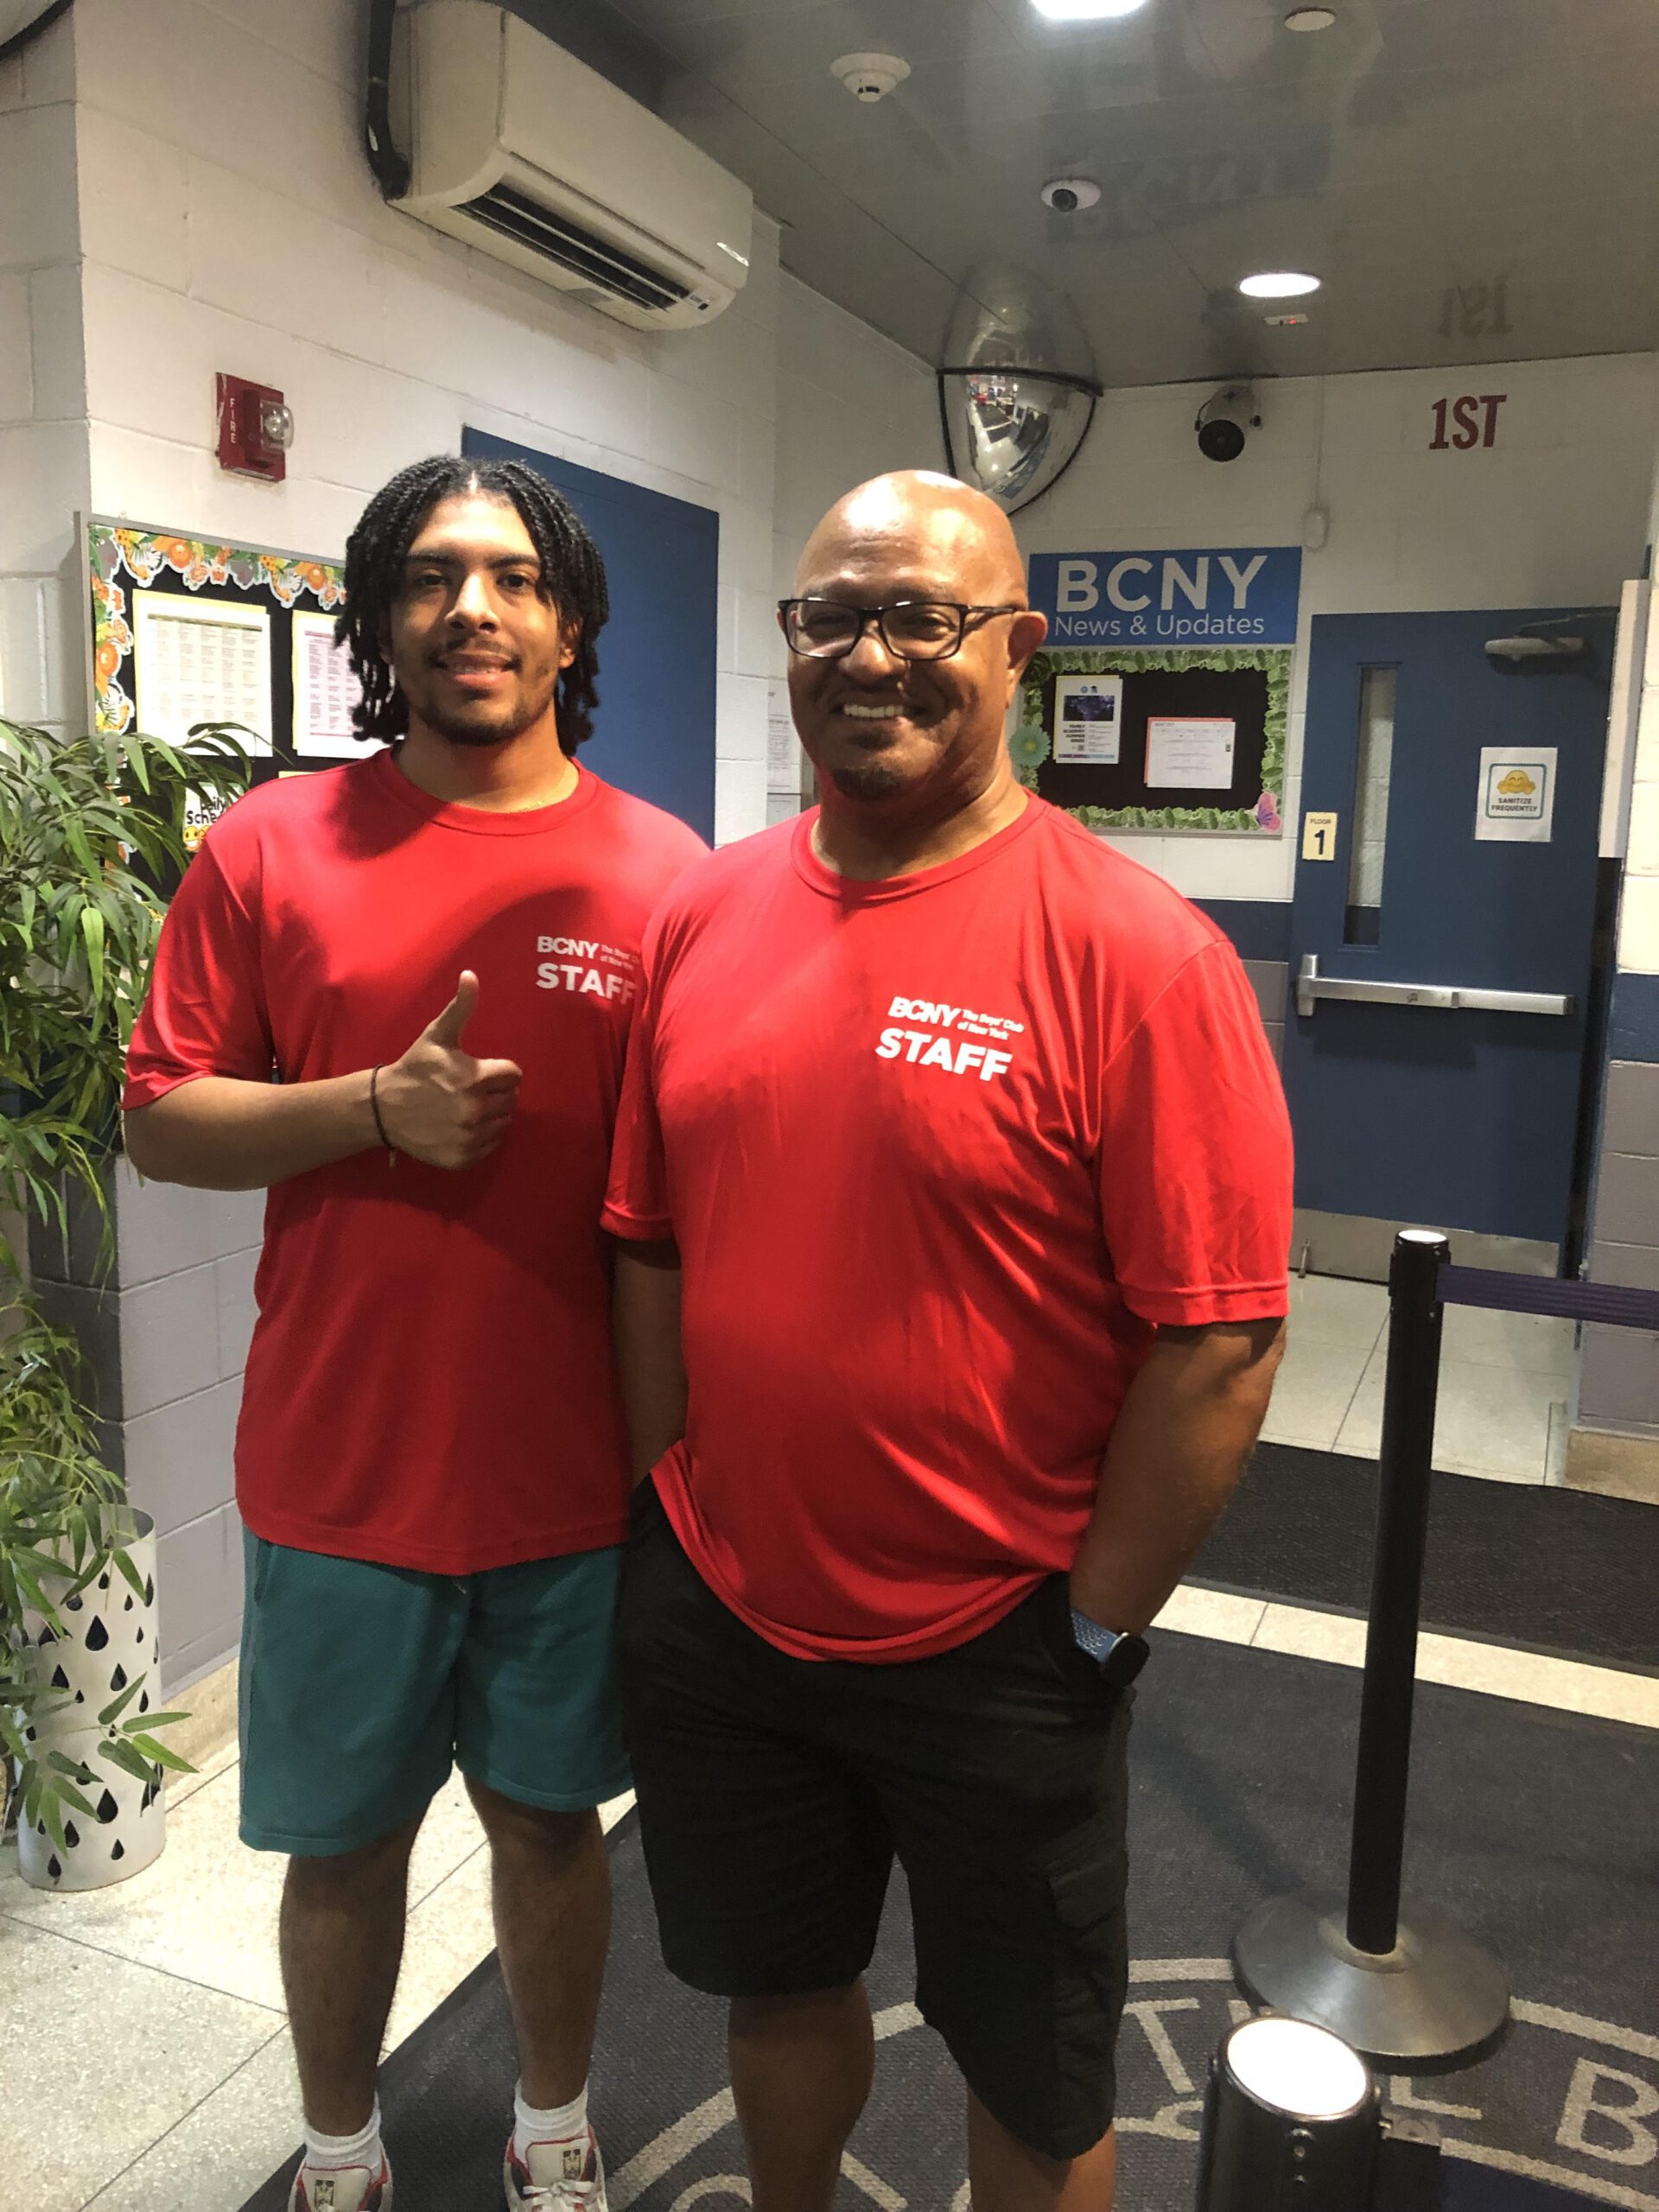 Carlos Vicente Sanchez and Ron Britt stand smiling in BCNY red staff shirts